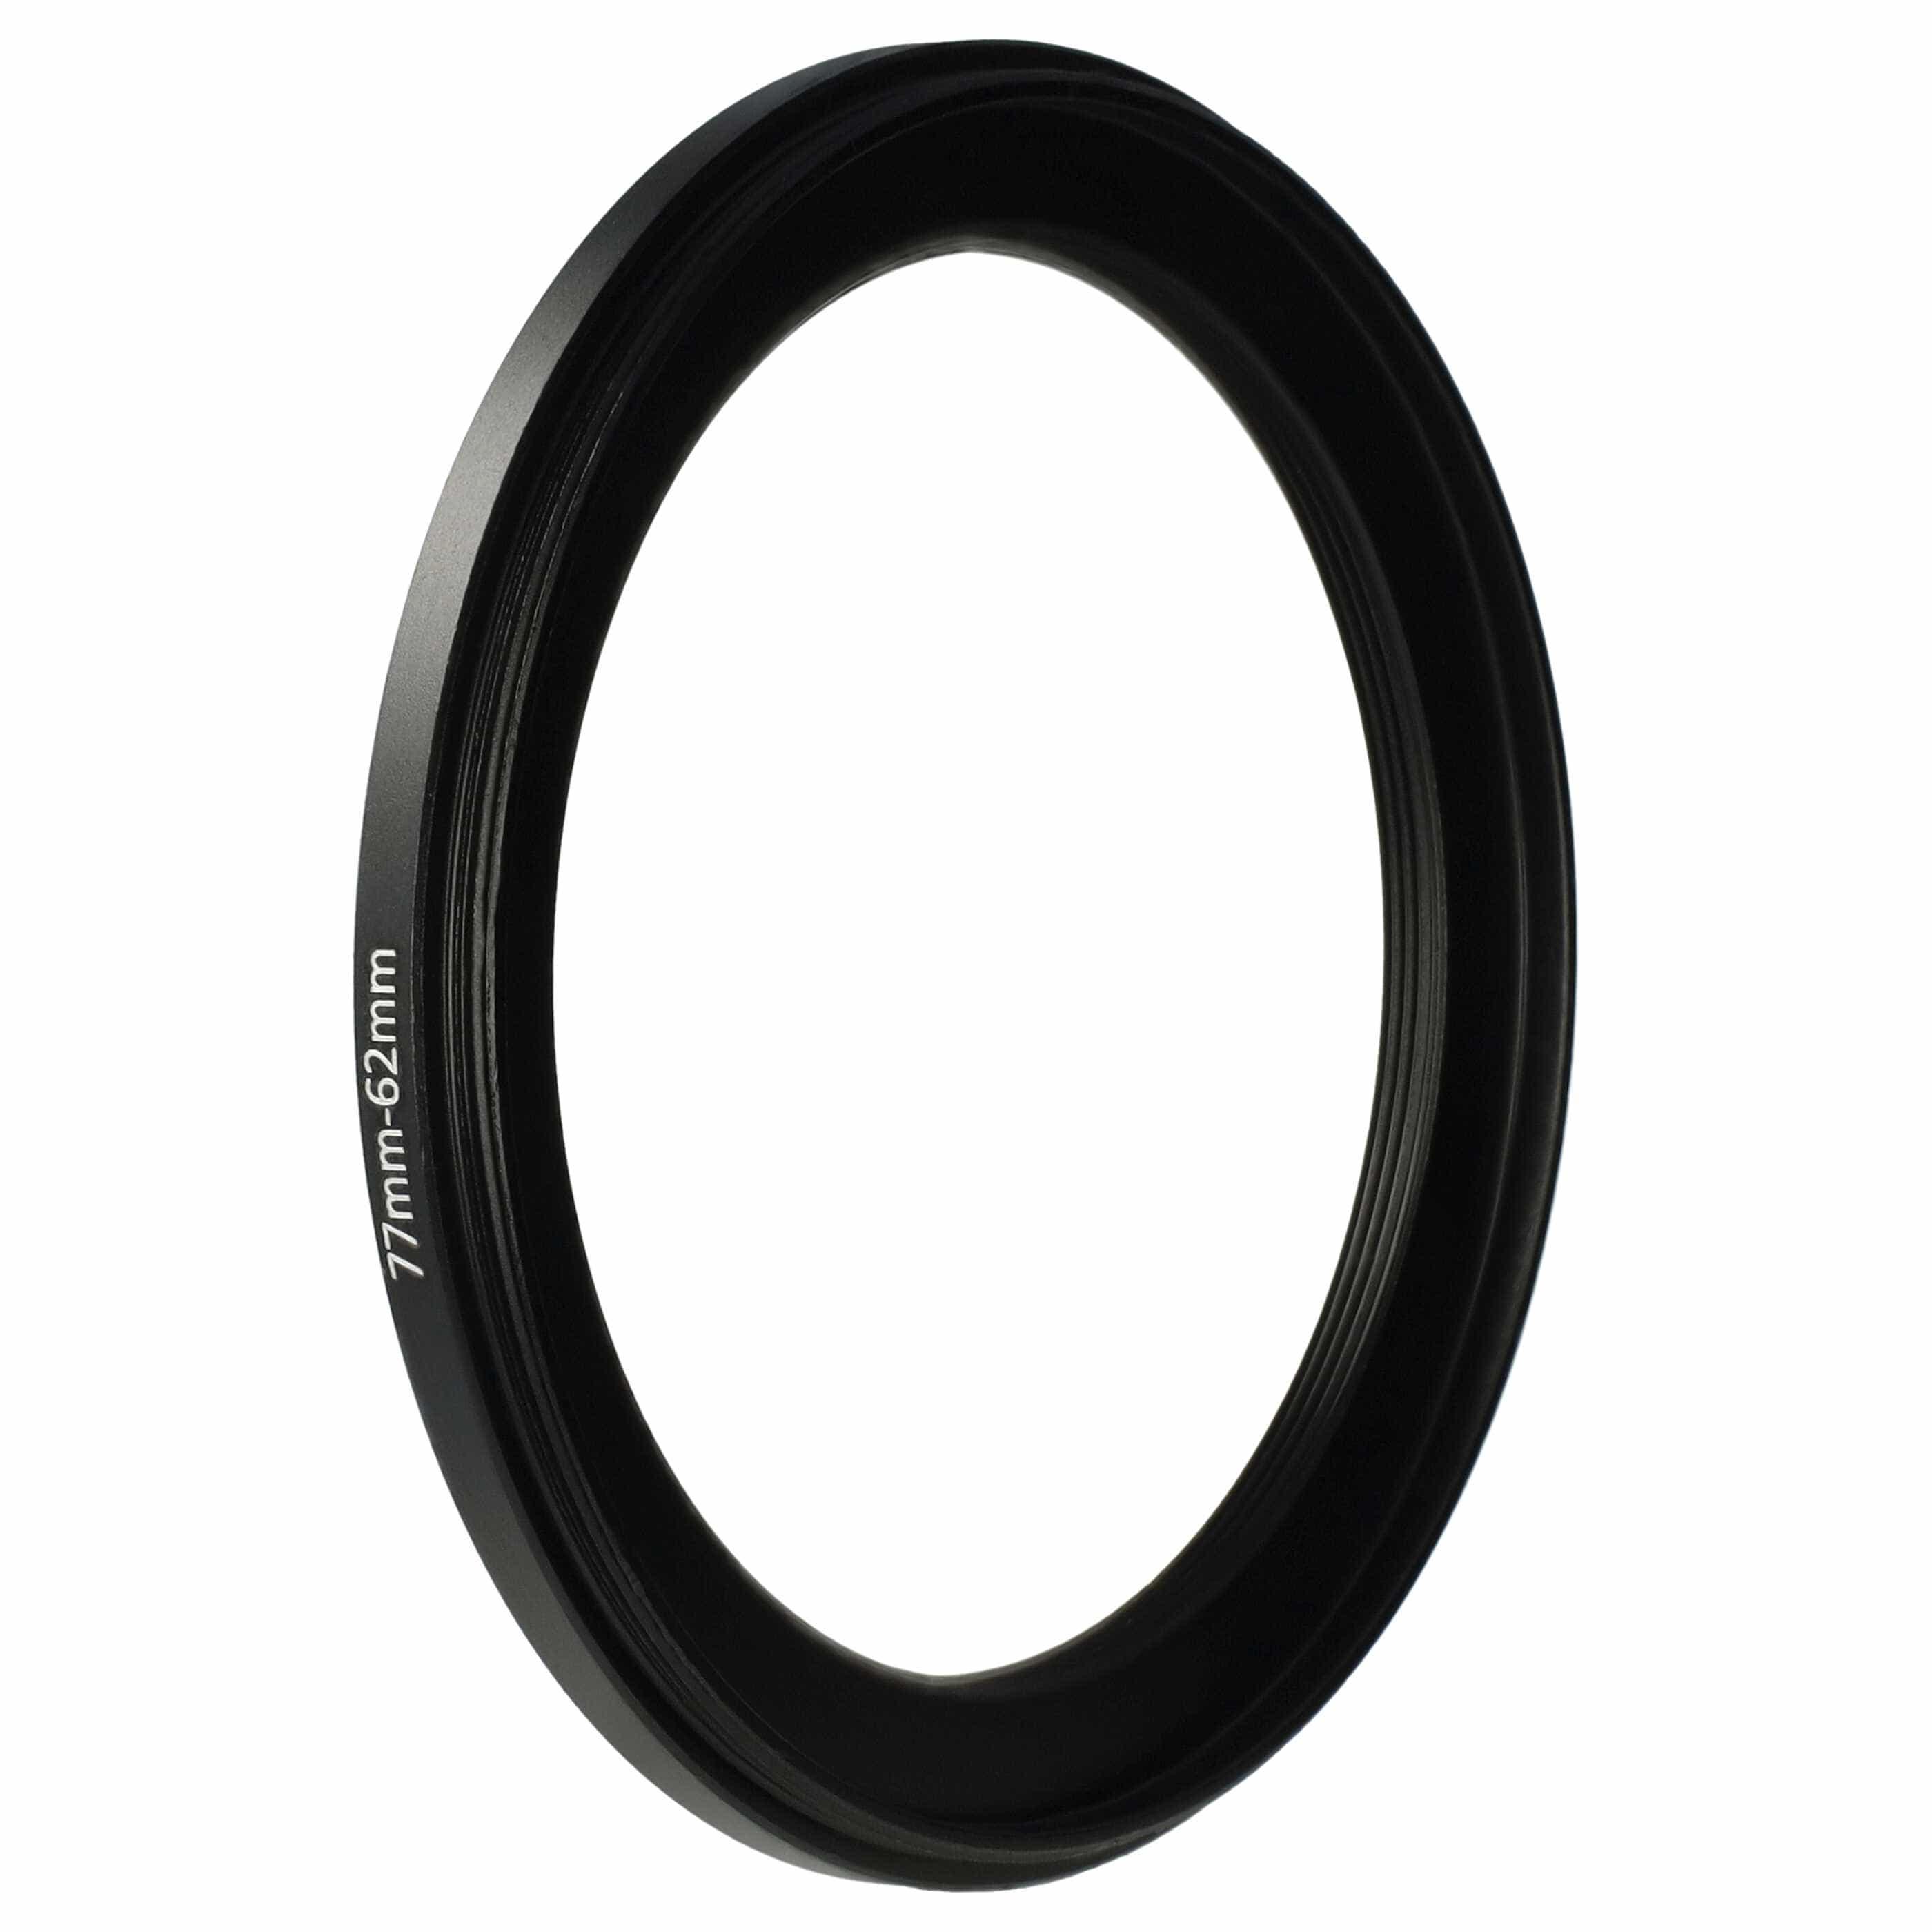 Step-Down Ring Adapter from 77 mm to 62 mm suitable for Camera Lens - Filter Adapter, metal